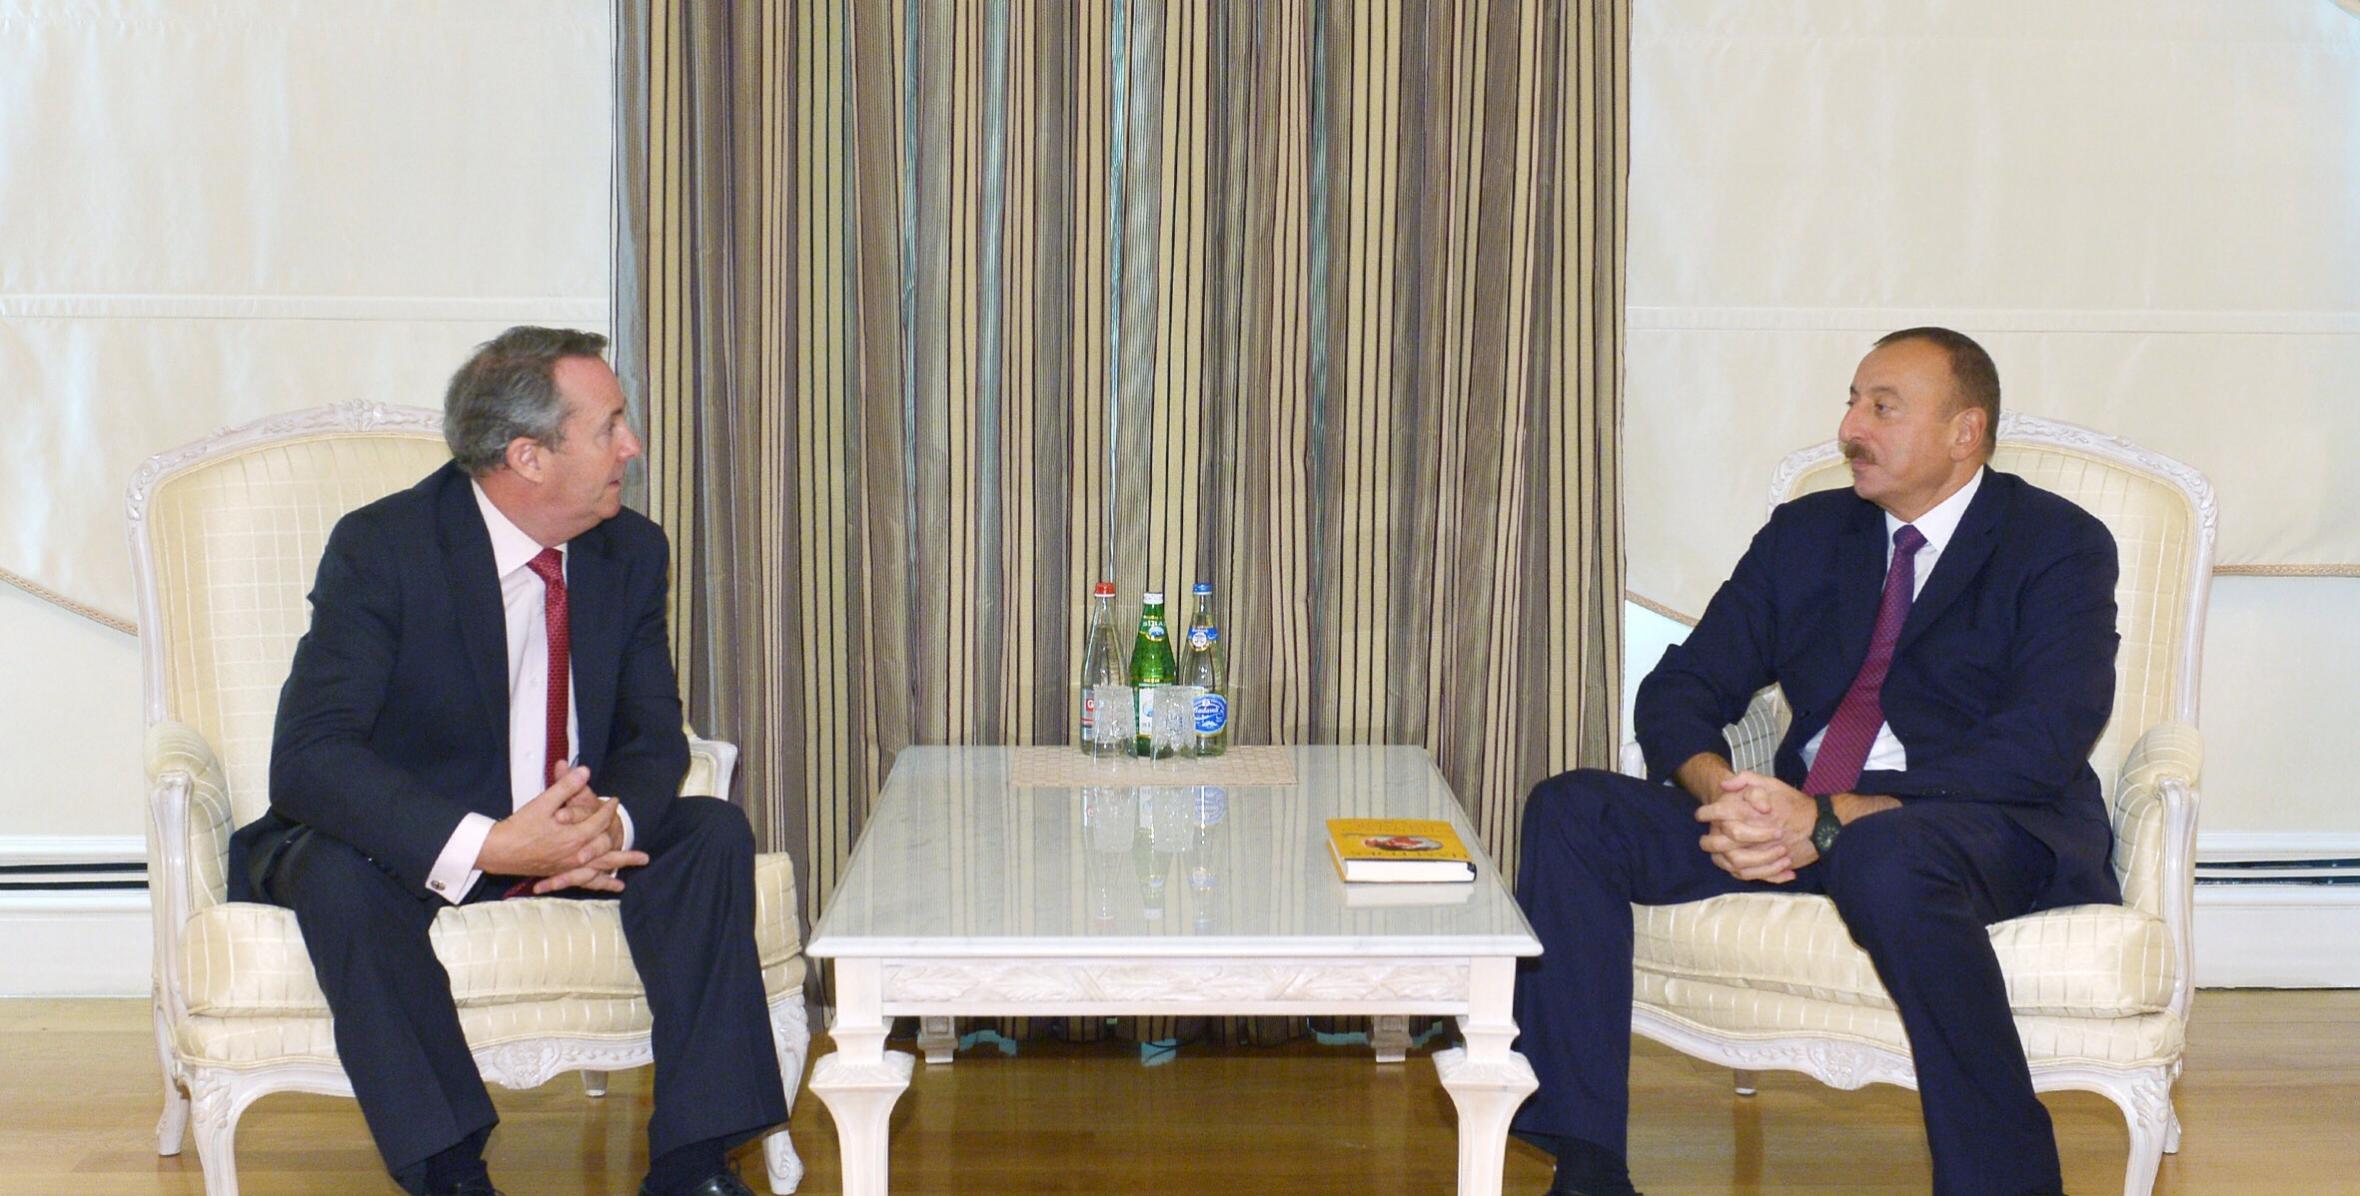 Ilham Aliyev received former UK Secretary of State for Defence, MP Liam Fox